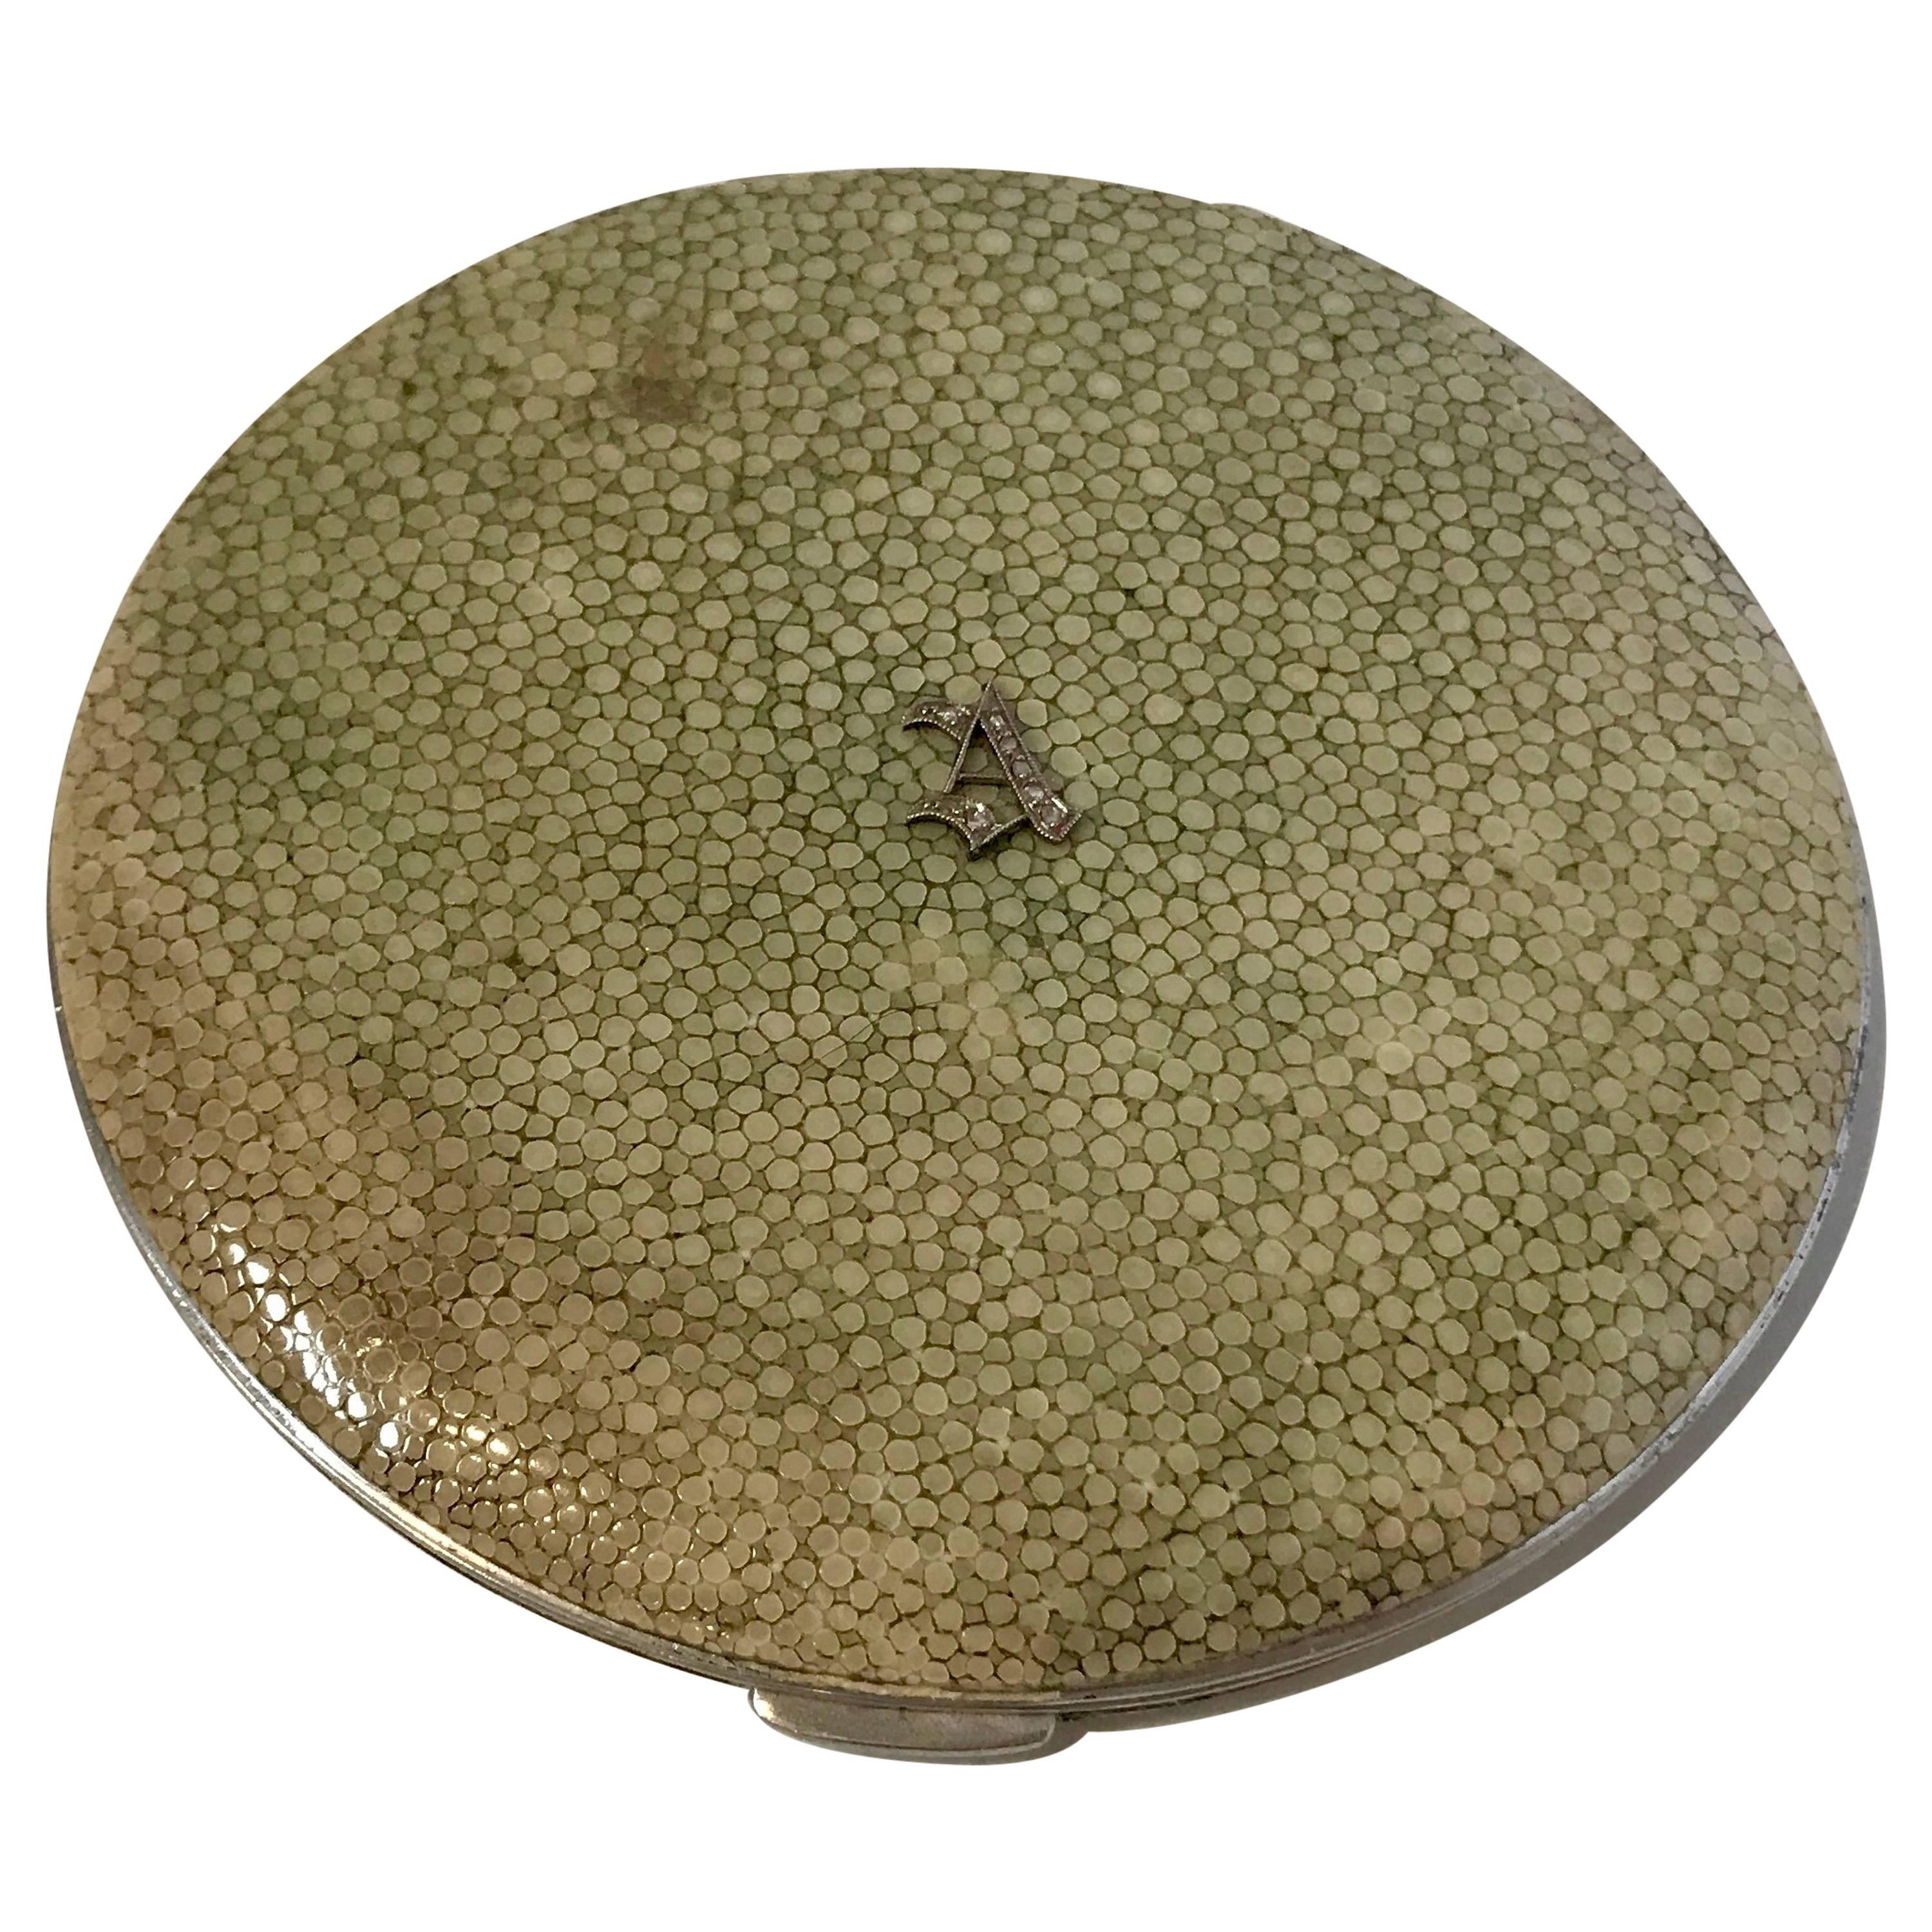 20th Century Art Deco Green Shagreen Compact For Sale